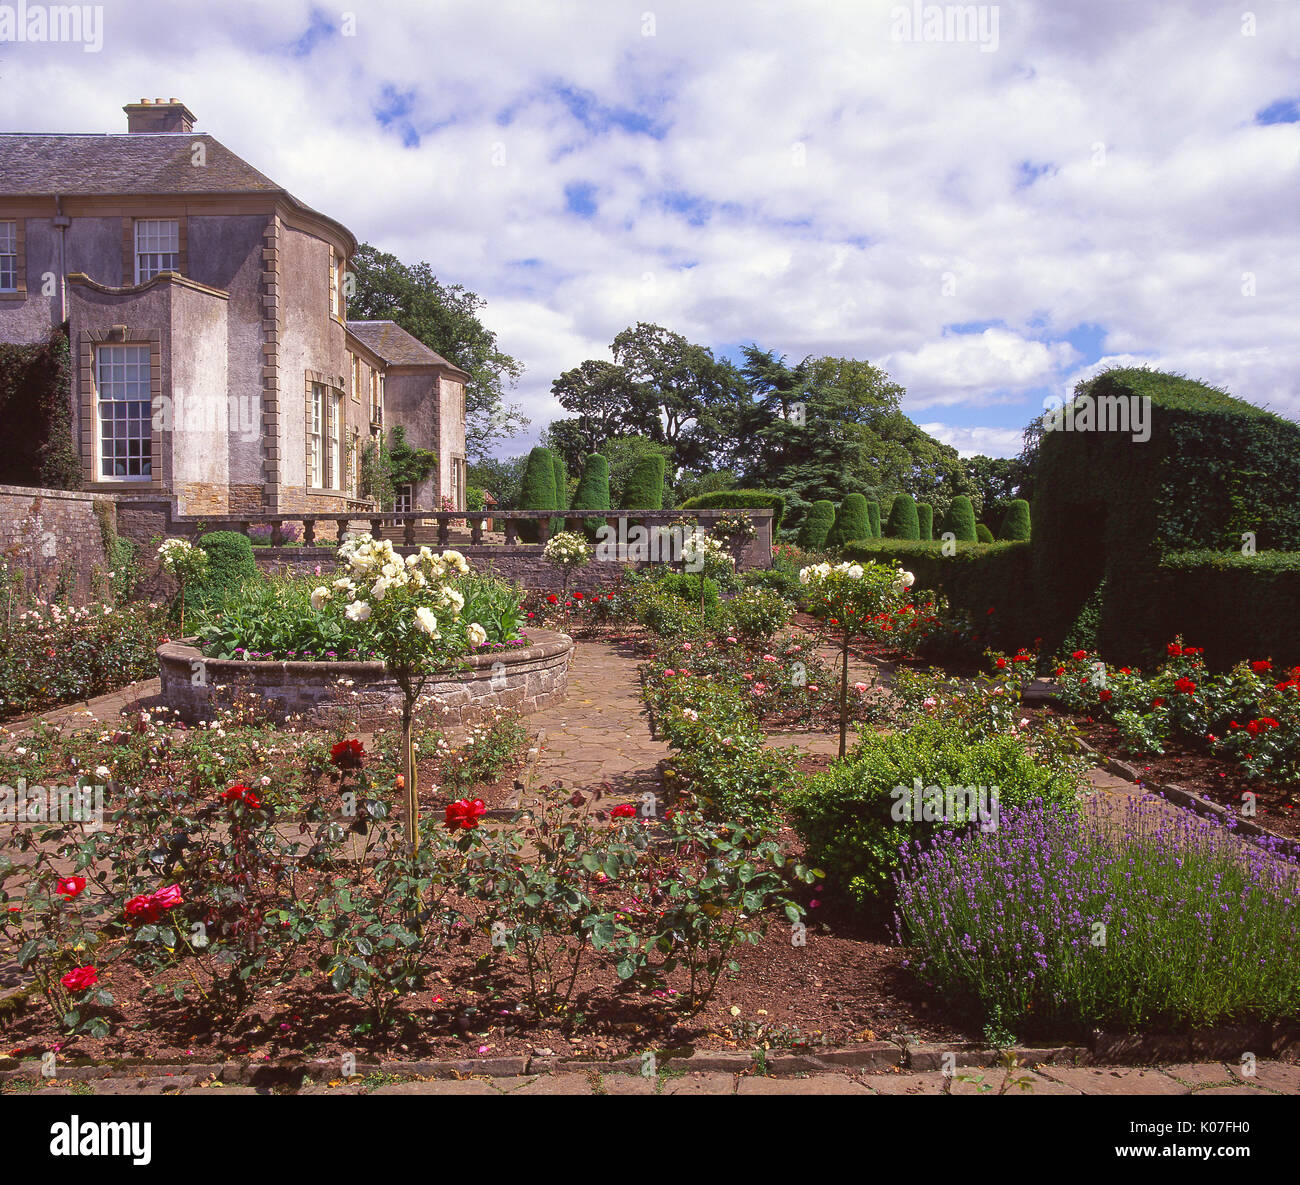 The Hill of Tarvit House and garden situated near the Fife town of Cupar, Fife, Scotland Stock Photo